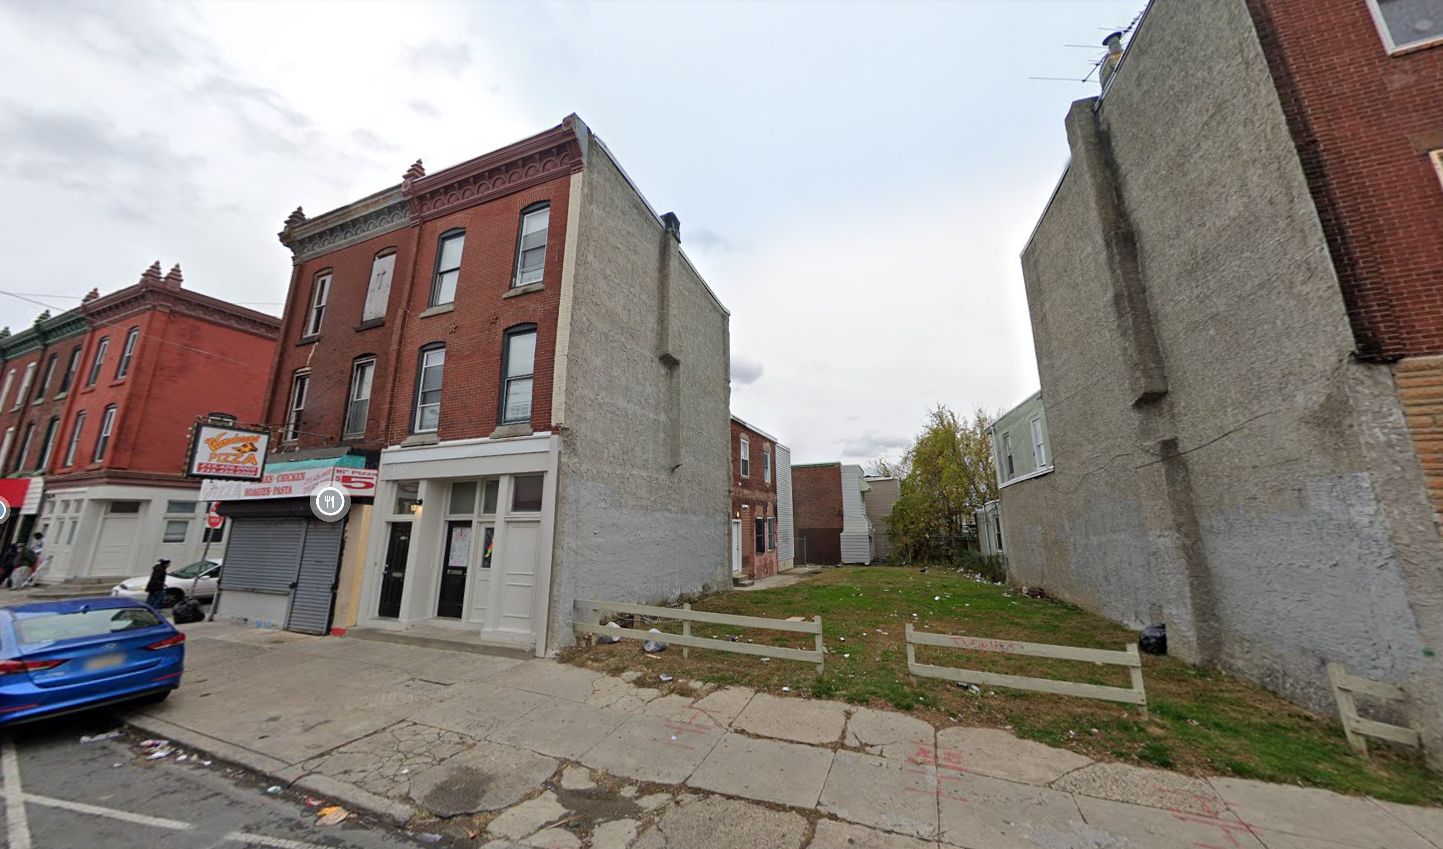 2951 Frankford Avenue. Looking east. Credit: Google Maps